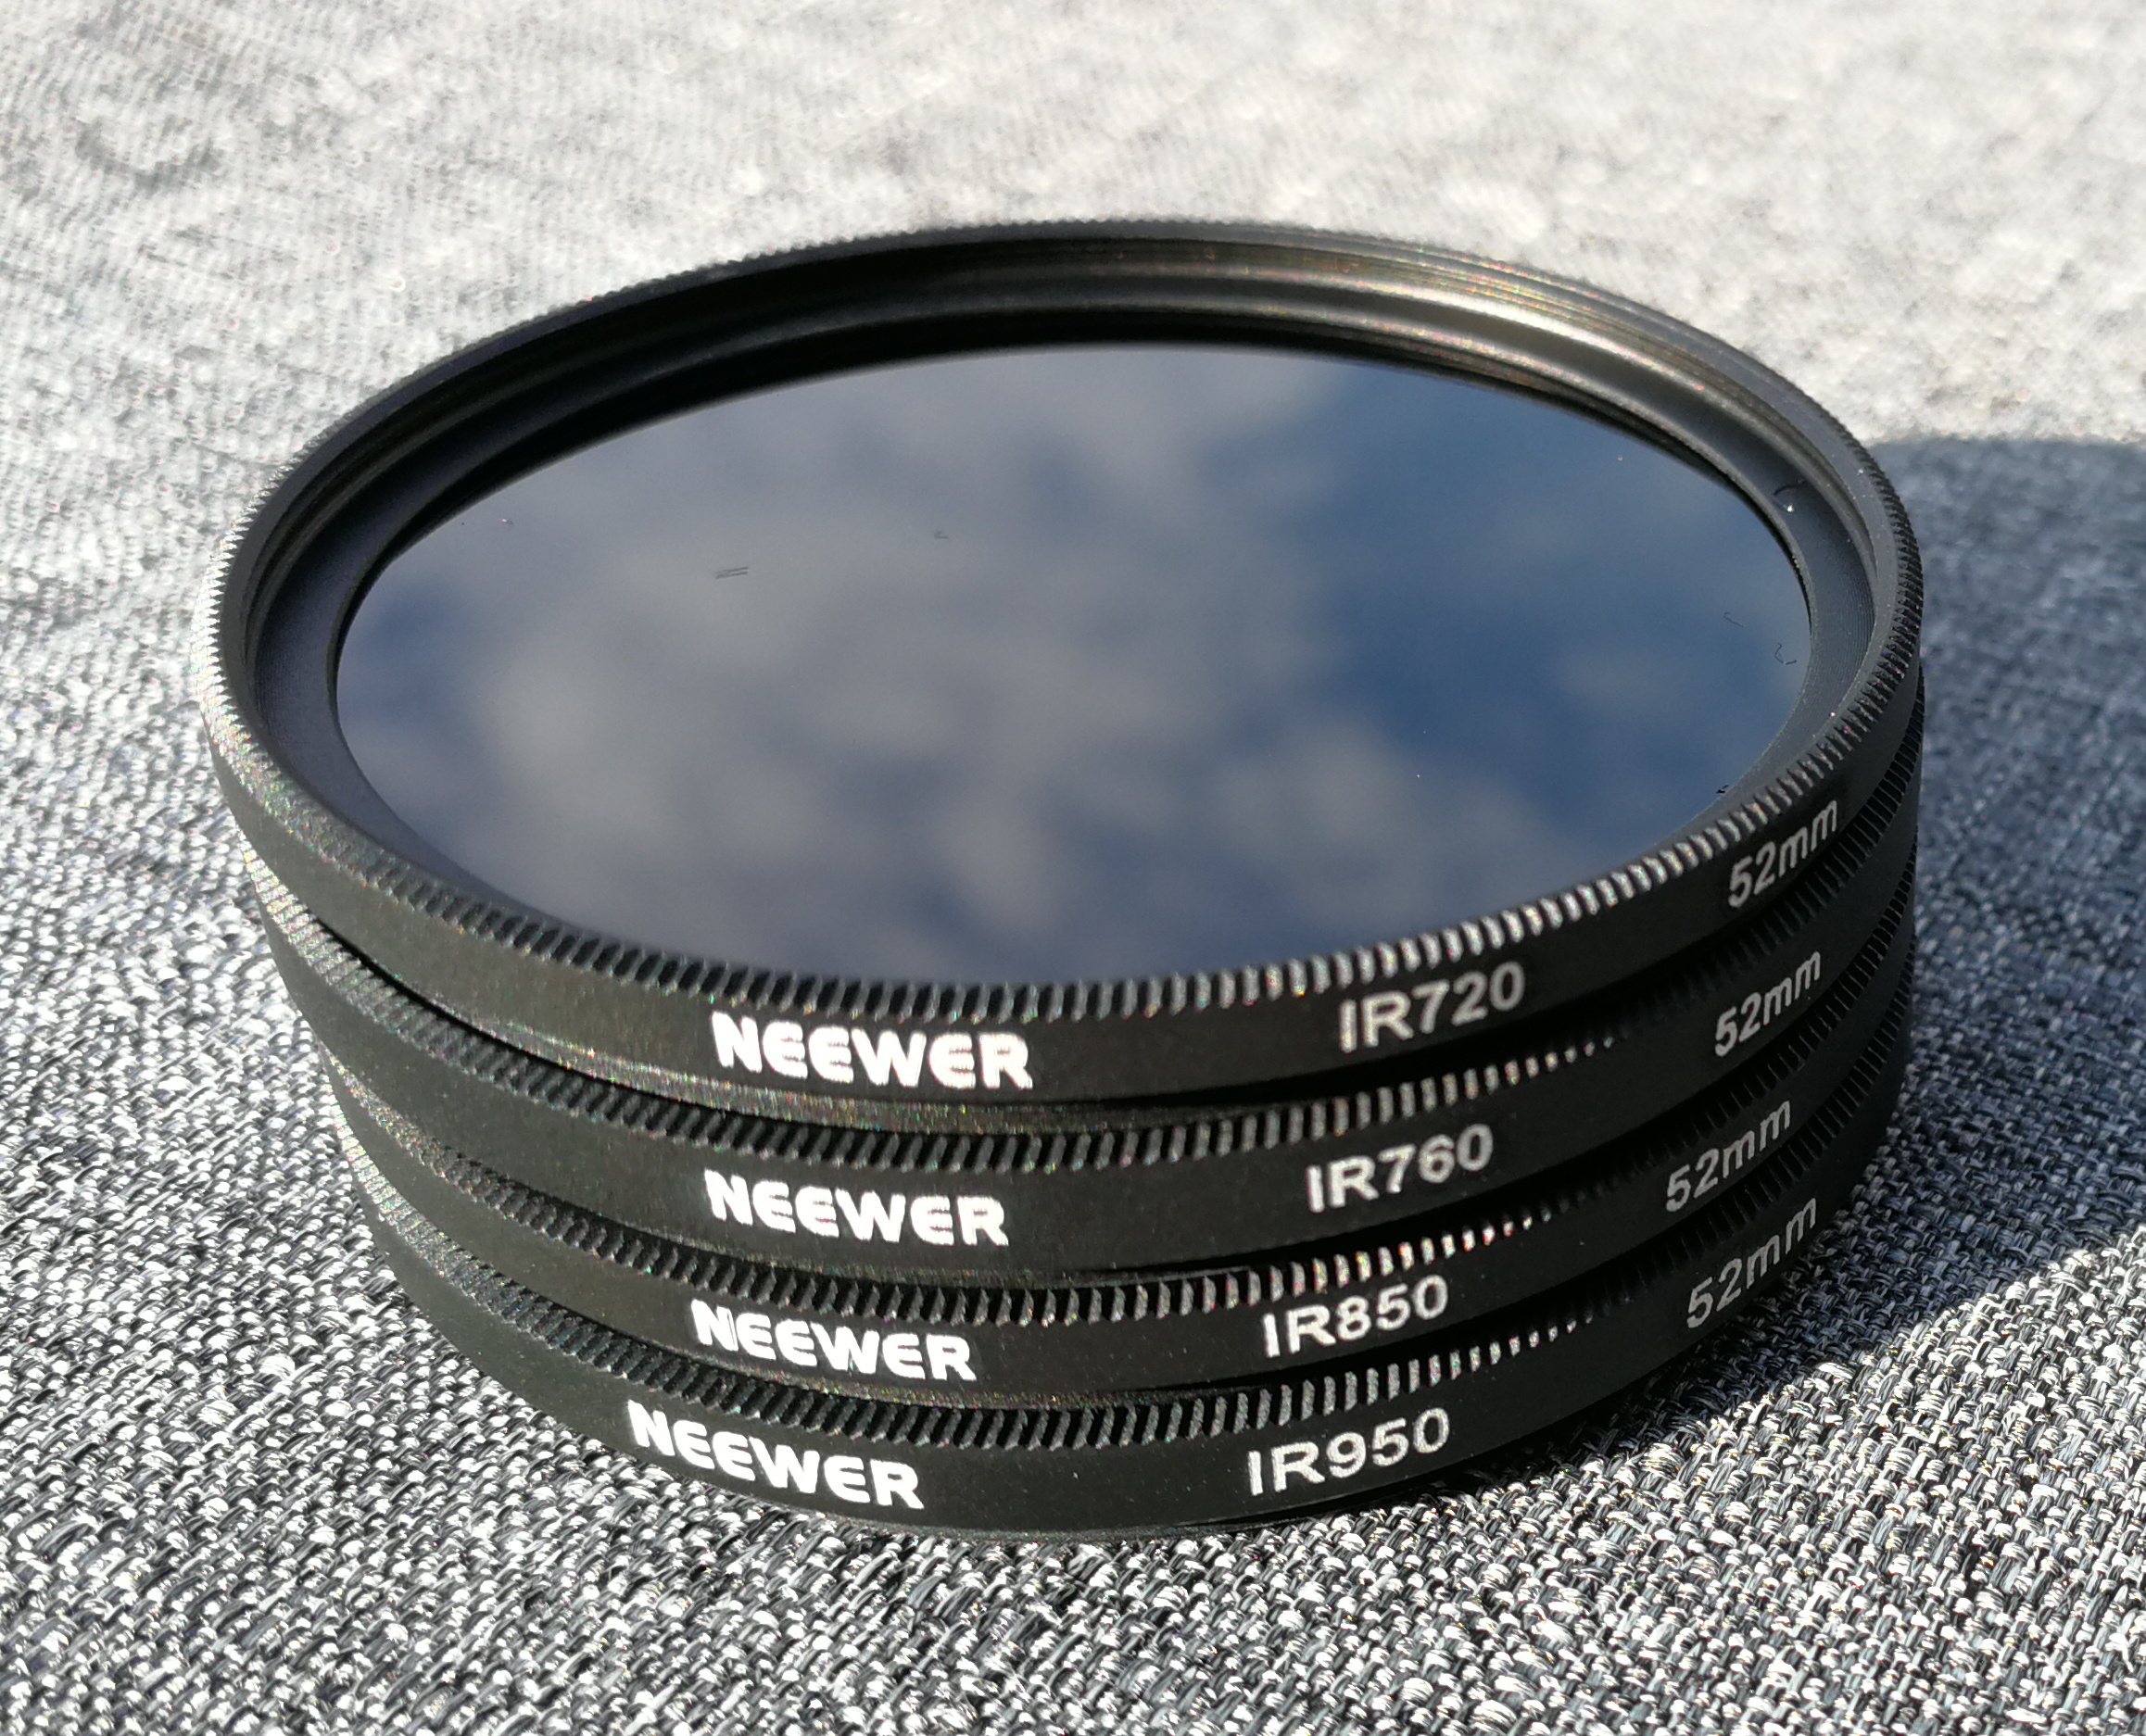 Picture of a stack of infrared light filters for a 52mm camera.